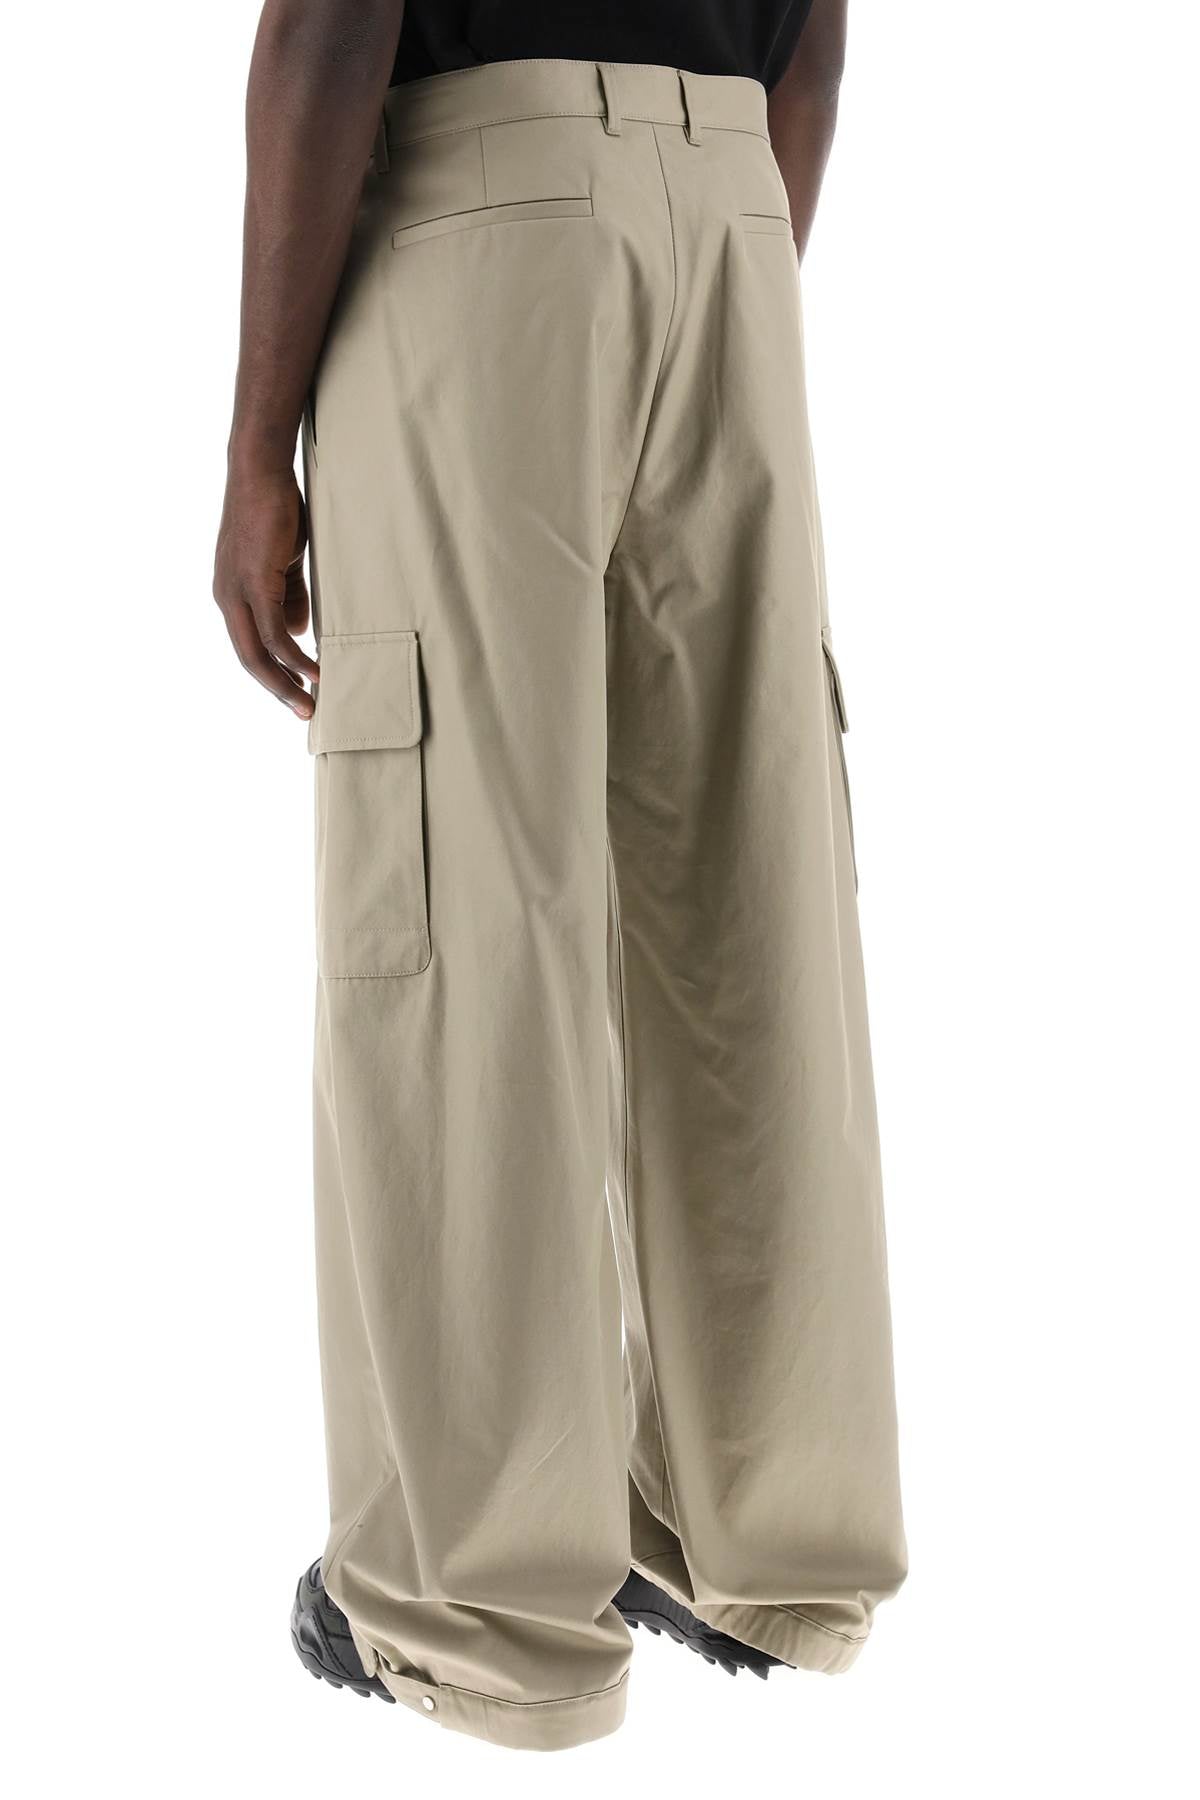 Off-white wide-legged cargo pants with ample leg-2